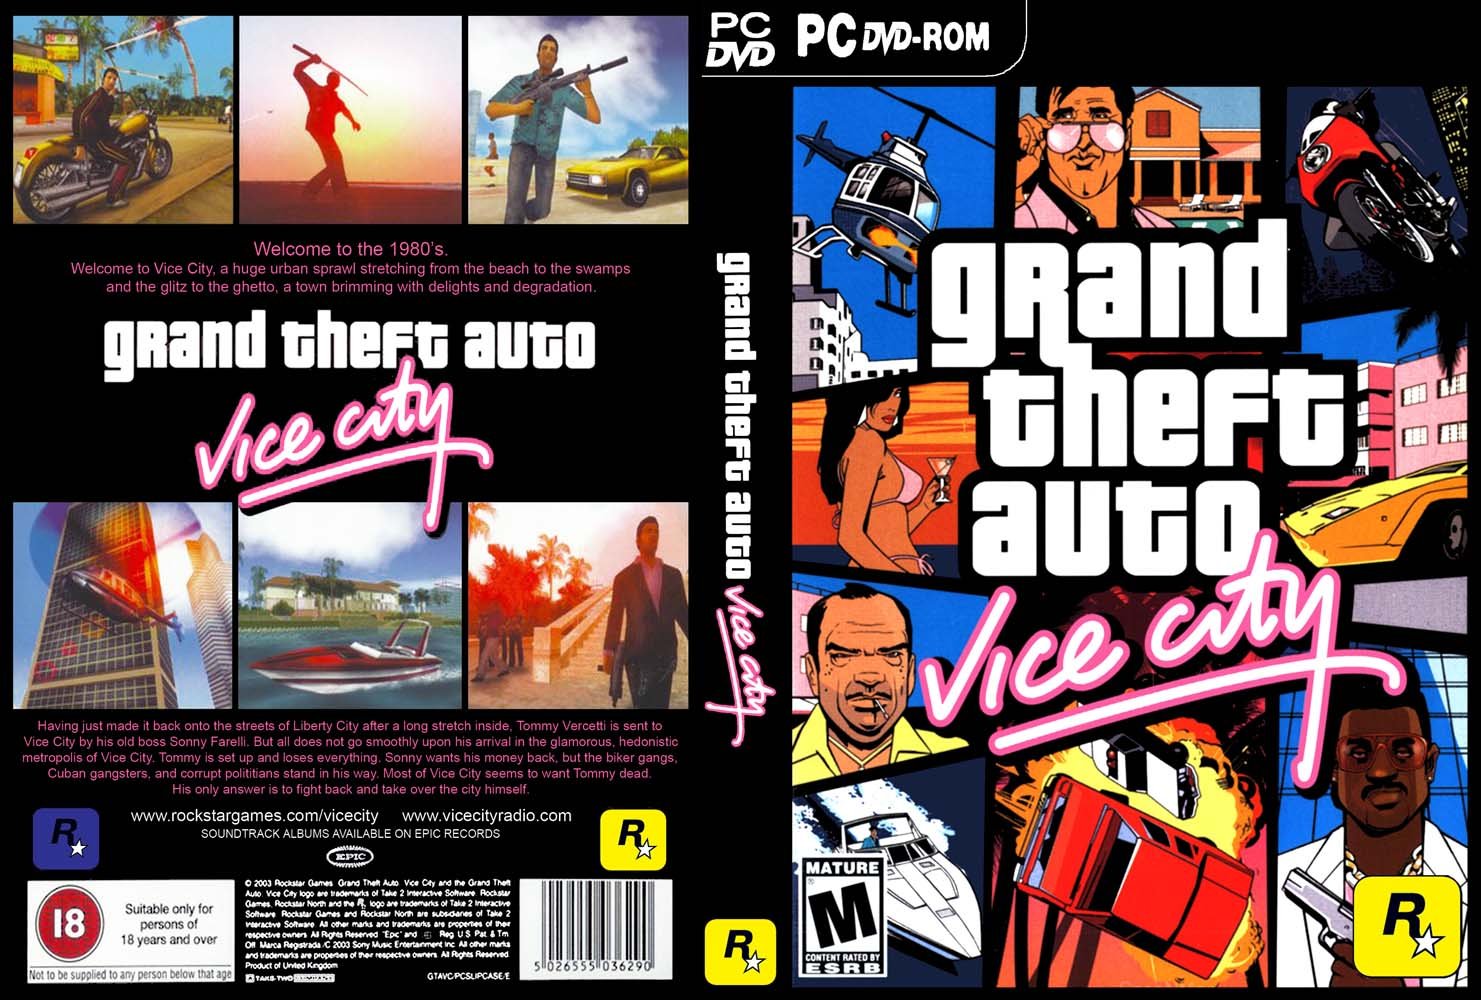 grand theft auto iv release date